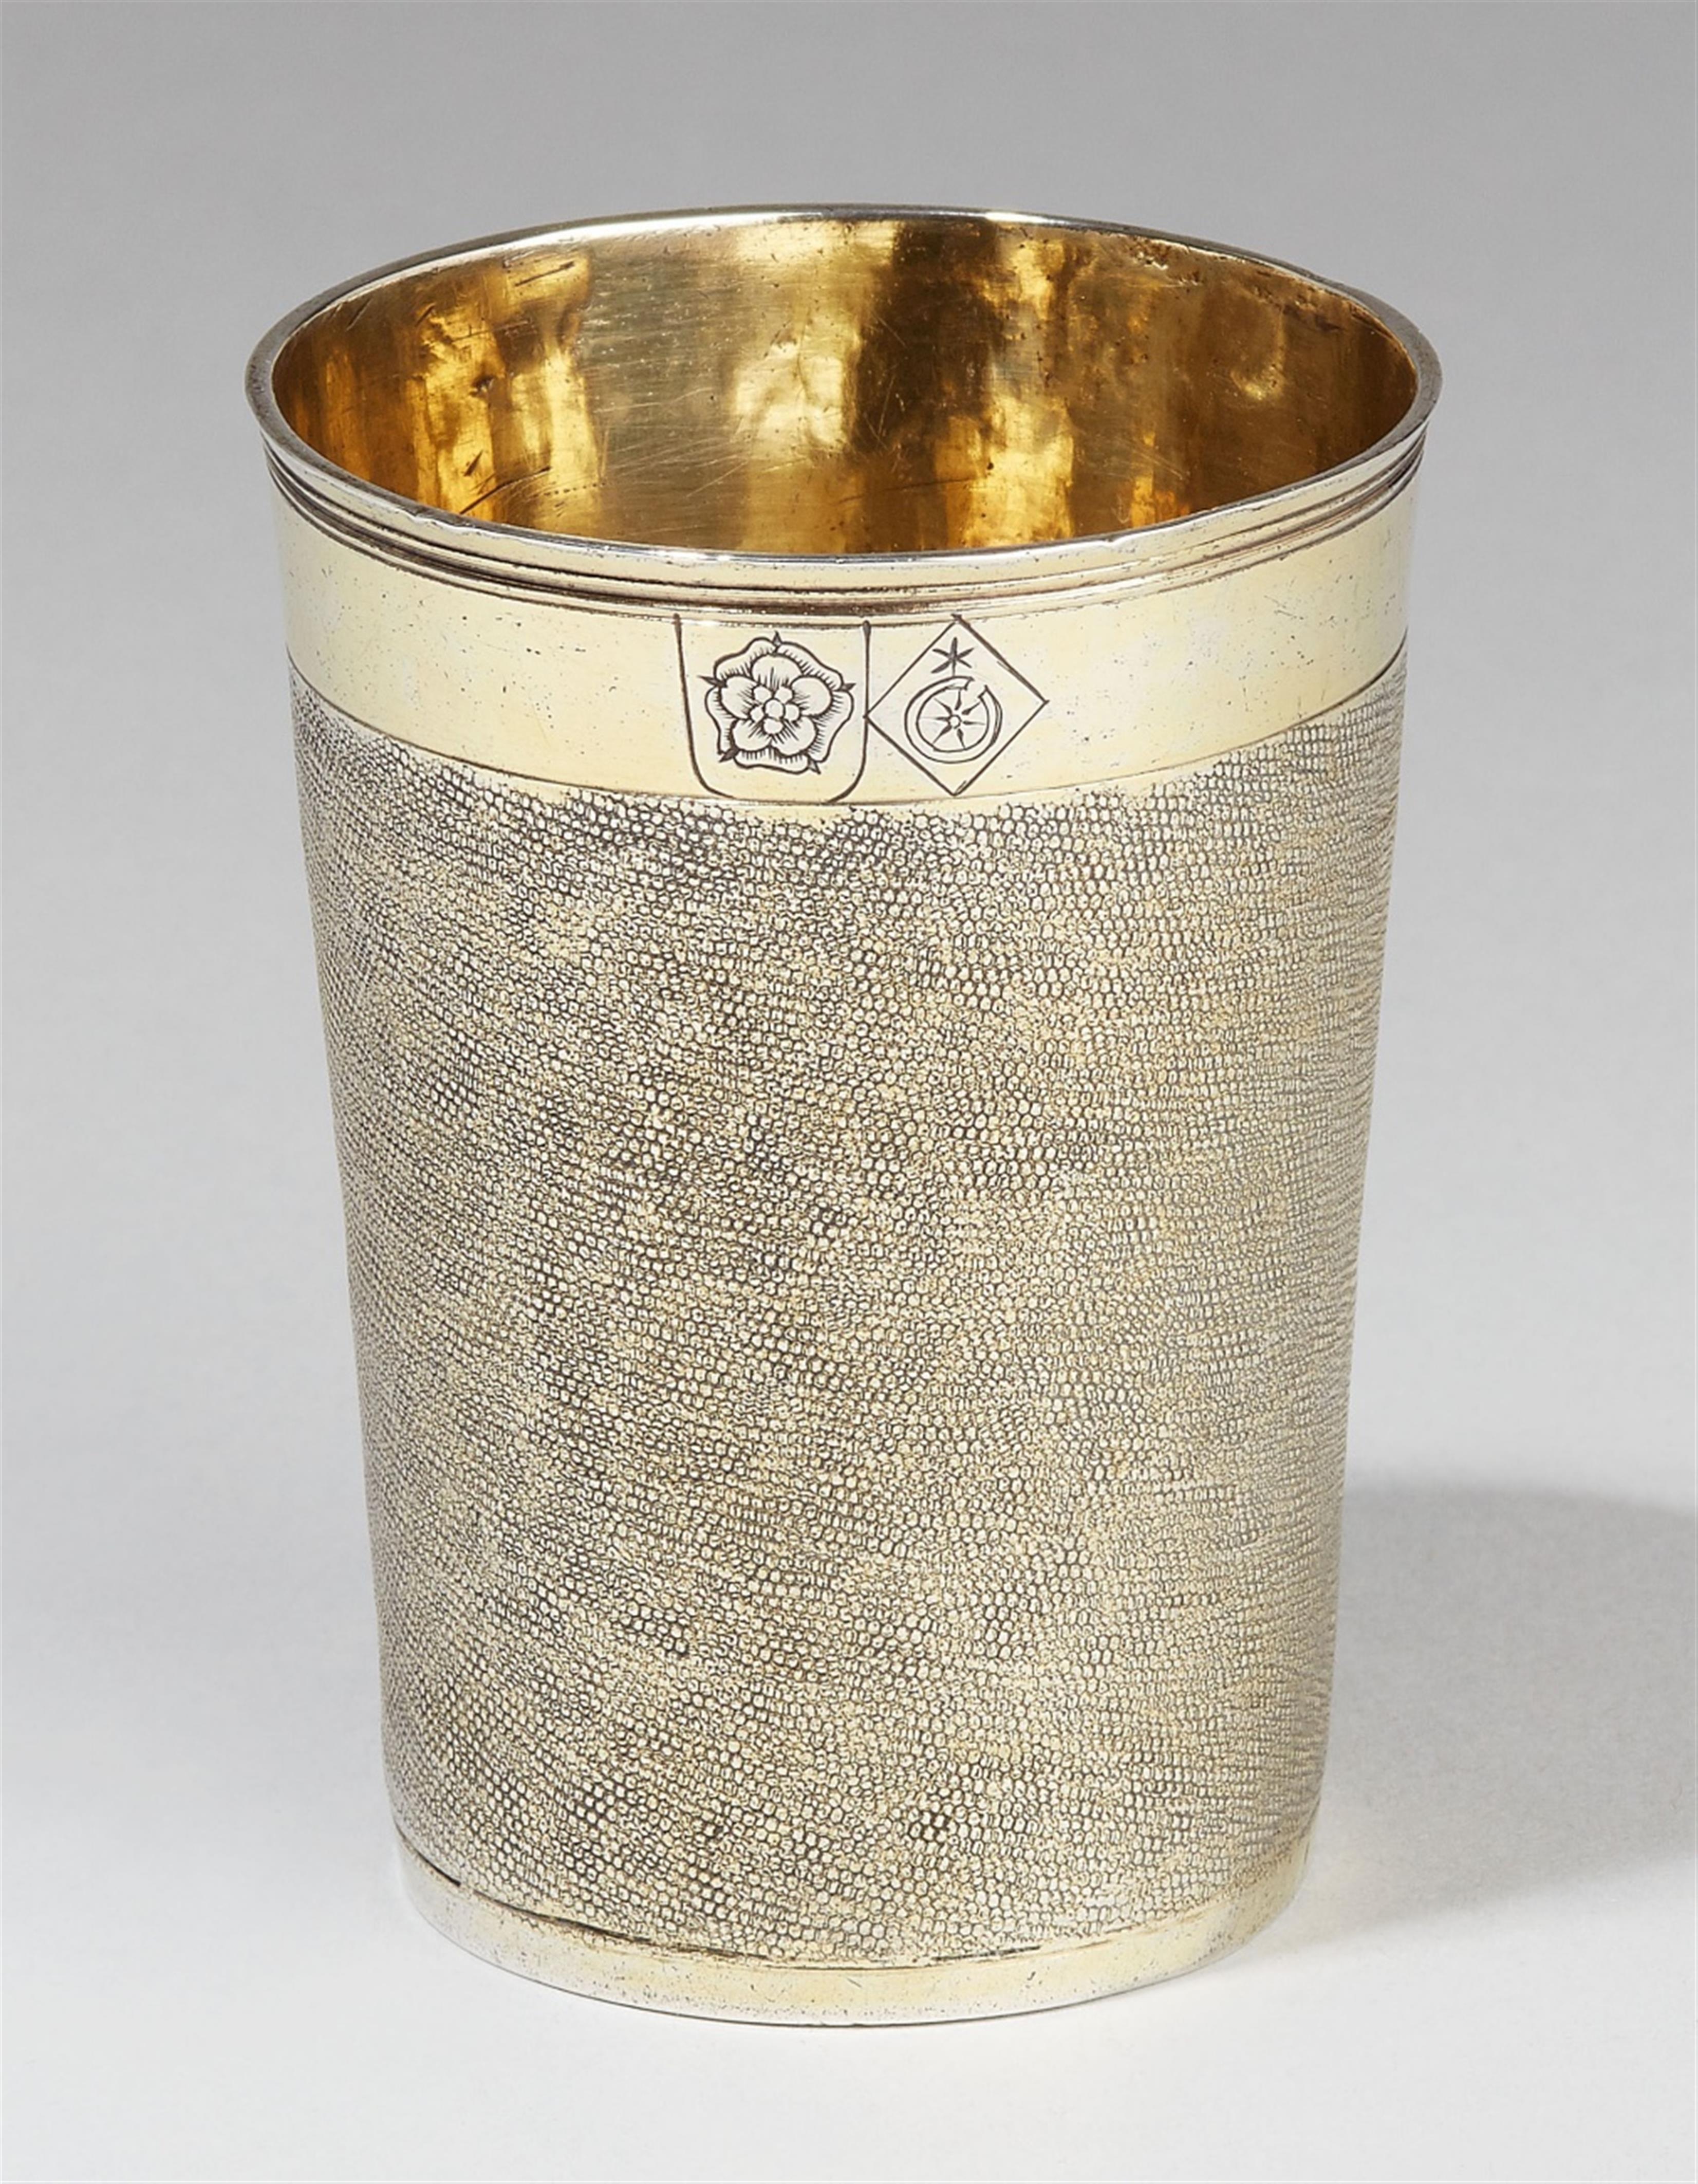 A Nuremberg partially gilt silver snakeskin beaker. Engraved with a small arms of alliance and with weight "3 1/10" to the underside. Marks of Lorenz Tittecke, 1609 - 26. - image-1